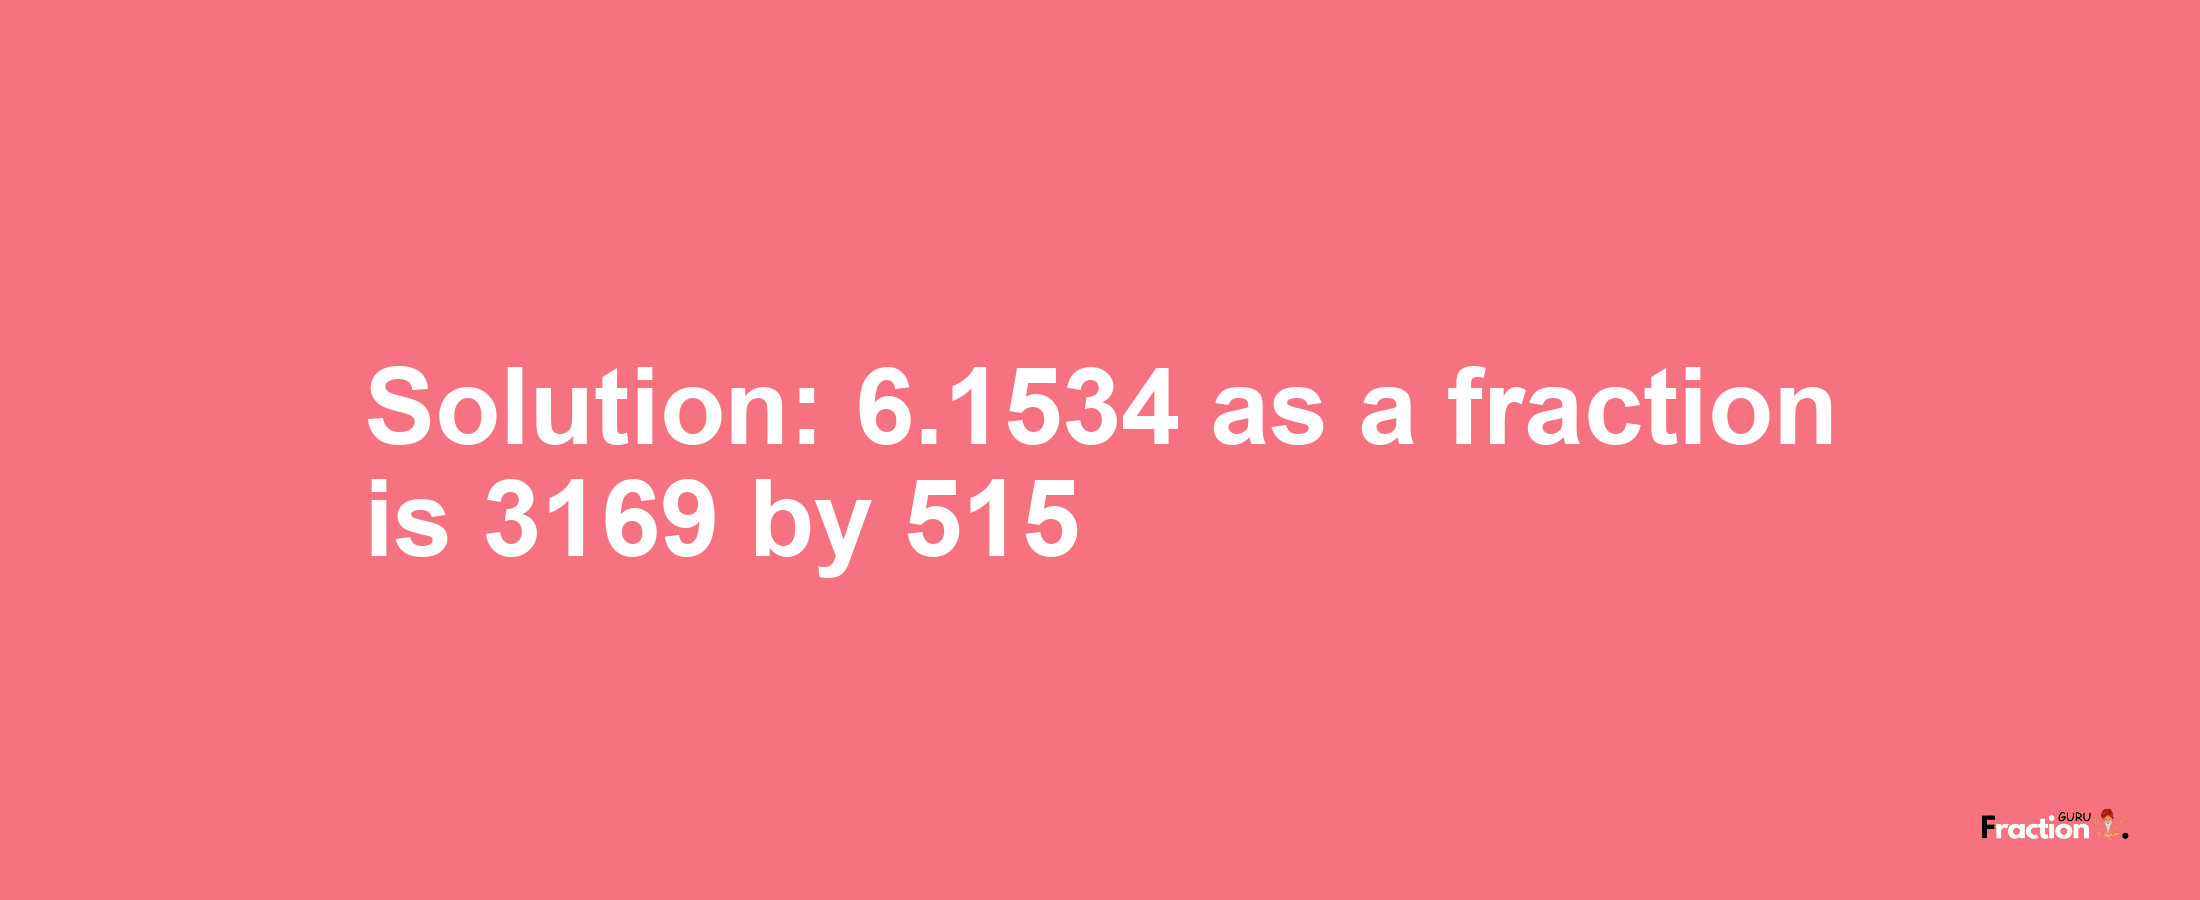 Solution:6.1534 as a fraction is 3169/515